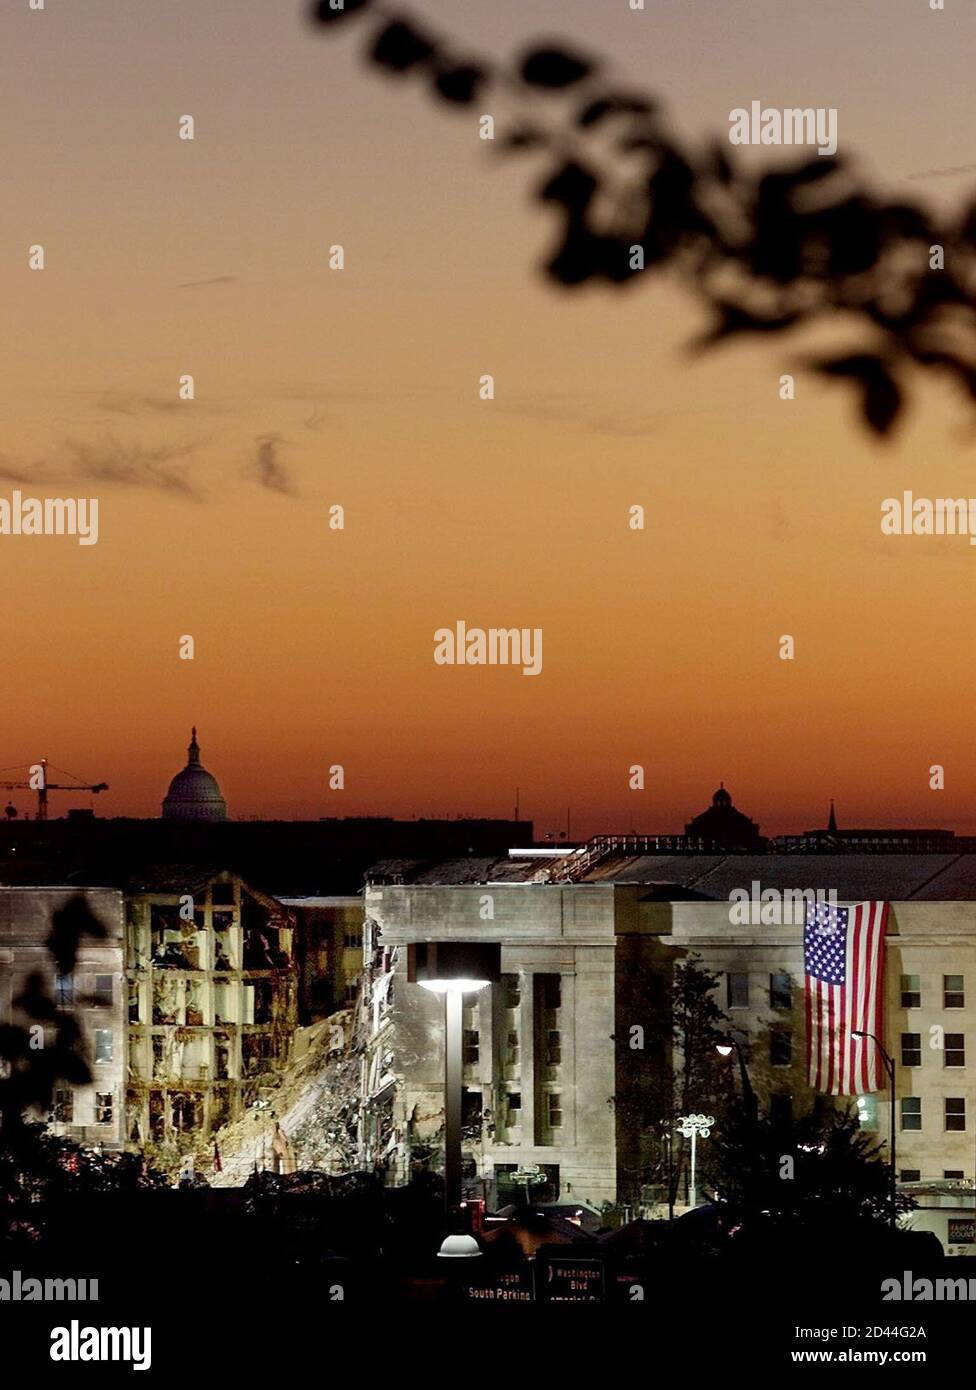 The damaged area of the Pentagon Building where a commercial jetliner slammed into it September 11, is seen in the early morning at sunrise with the U.S. Capitol Building in the background, September 17, 2001. The U.S. military said on September 15 that it would cost 'hundreds of millions' of dollars to repair the damage after a hijacked jetliner struck its 48-year-old Pentagon headquarters.REUTERS/Larry Downing  LSD/SV Stock Photo